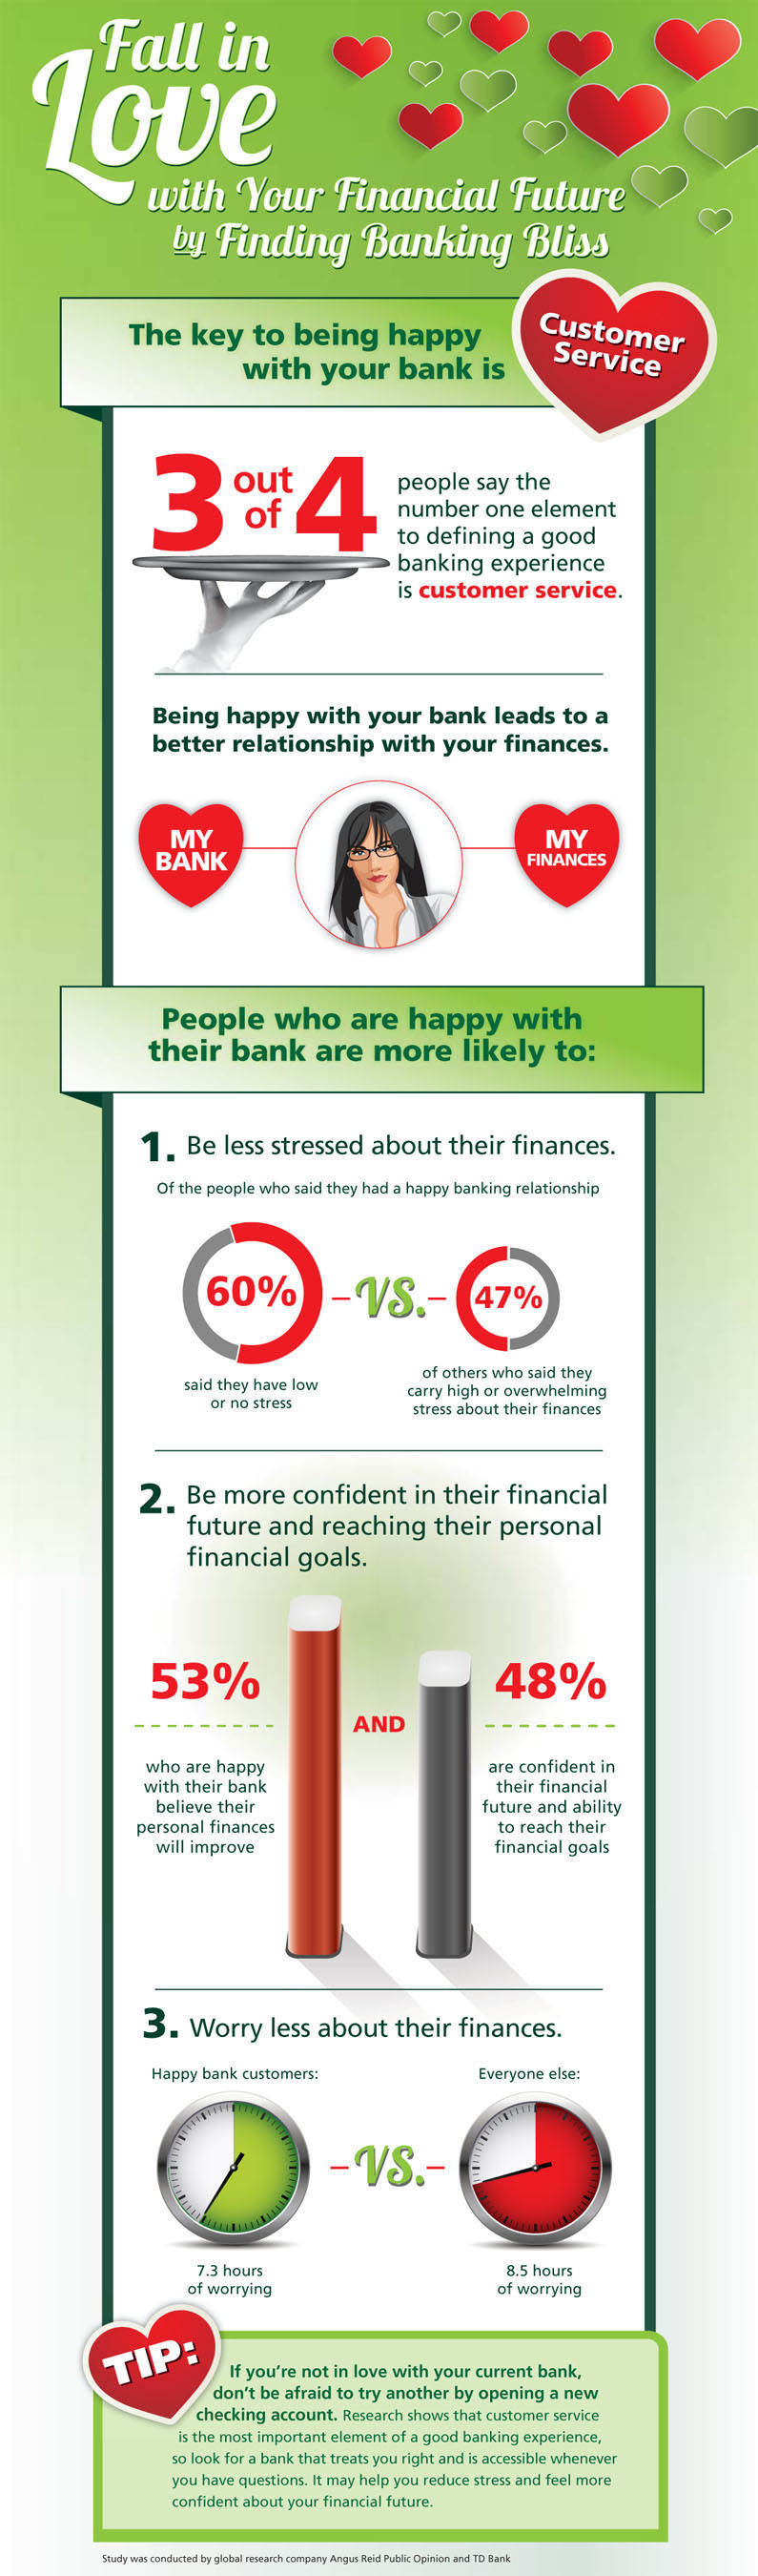 Consumers "feeling the love" from their bank found to have less financial stress and more confidence in financial future according to a survey conducted by Angus Reid Public Opinion and TD Bank. (PRNewsFoto/TD Bank) (PRNewsFoto/TD BANK)